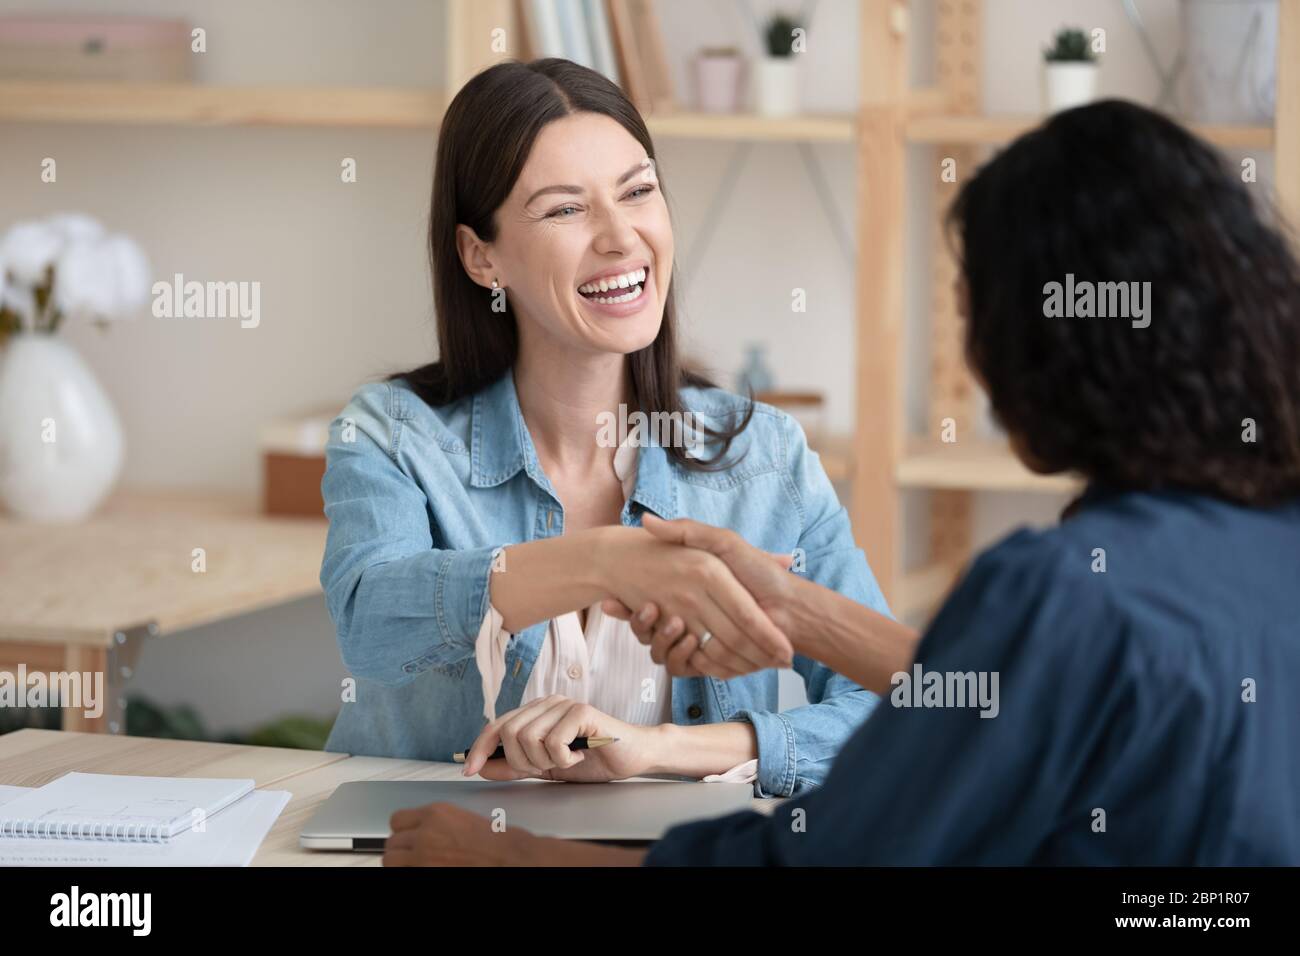 Close up smiling young businesswoman shaking hands with job seeker. Stock Photo